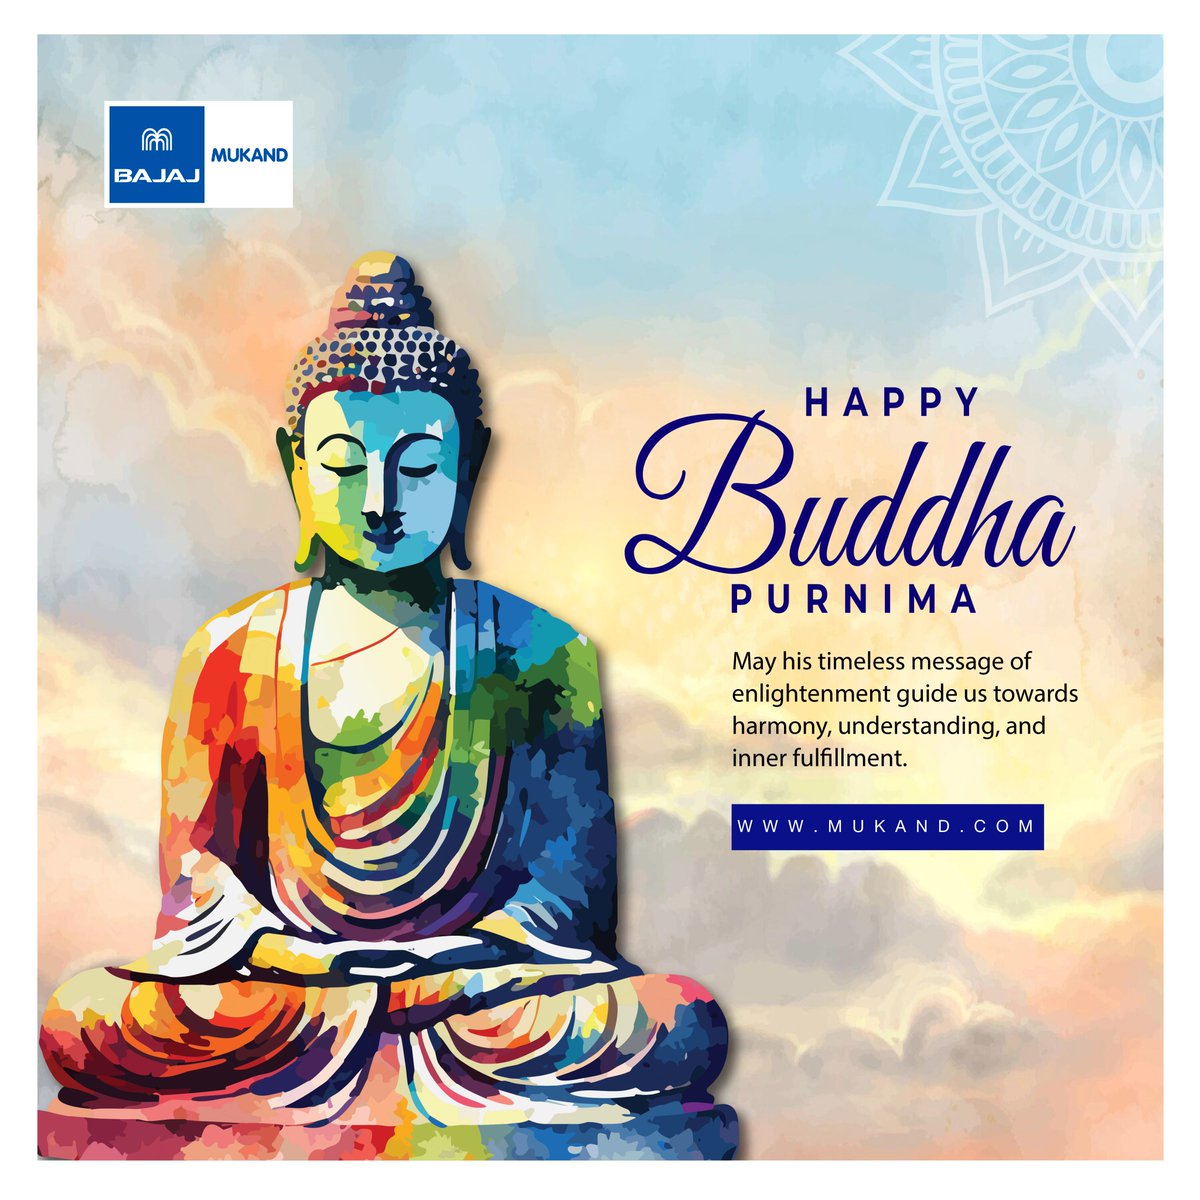 May the teachings of Lord Buddha inspire us towards peace, compassion, and enlightenment. Wishing everyone a blessed Buddha Purnima from @MukandSteel . 

 #BuddhaPurnima #Peace #Enlightenment #MukandLimited #Manufacturing #Positivity #Bajaj #StainlessSteel